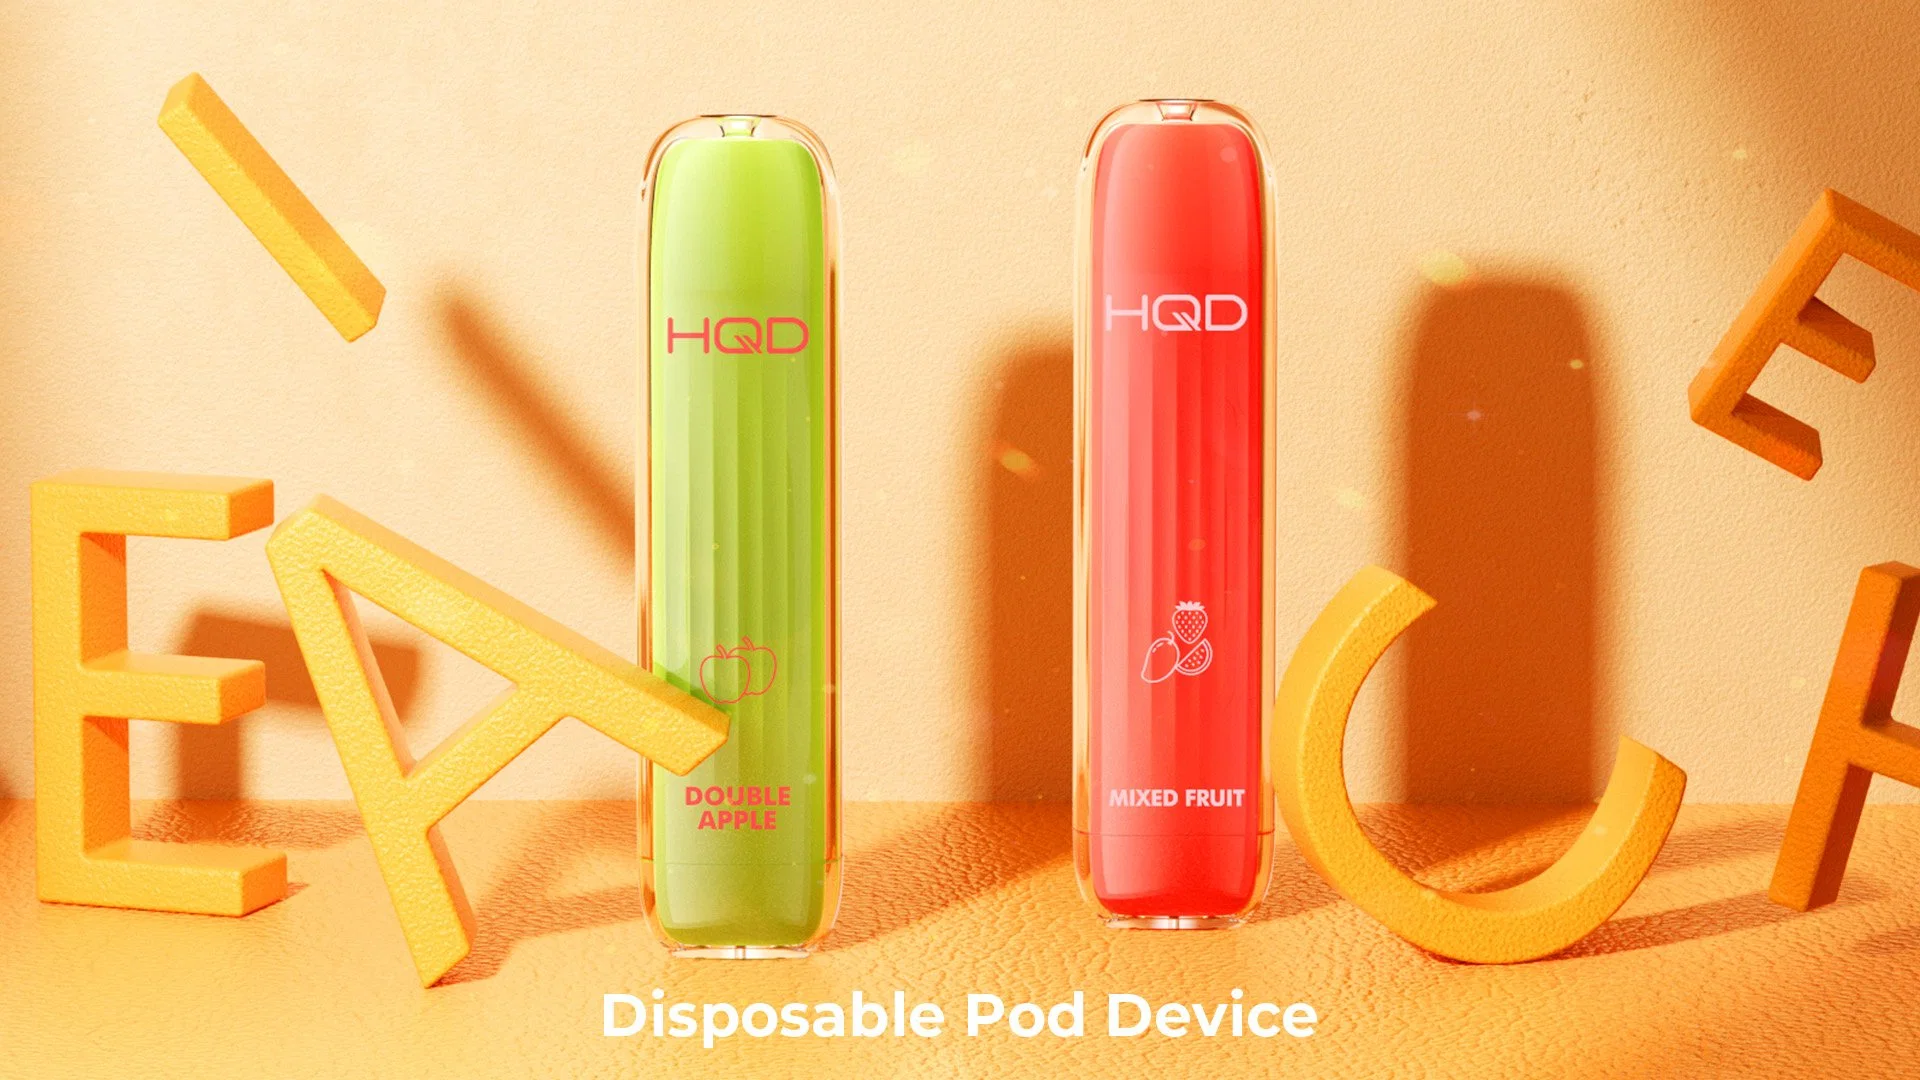 China Shenzhen Pod System Disposable/Chargeable Vape Hqd Wave 600 Puffs Electronic Cigarette Wholesale/Supplier I Get Puffs Pen Style Disposable/Chargeable Vape